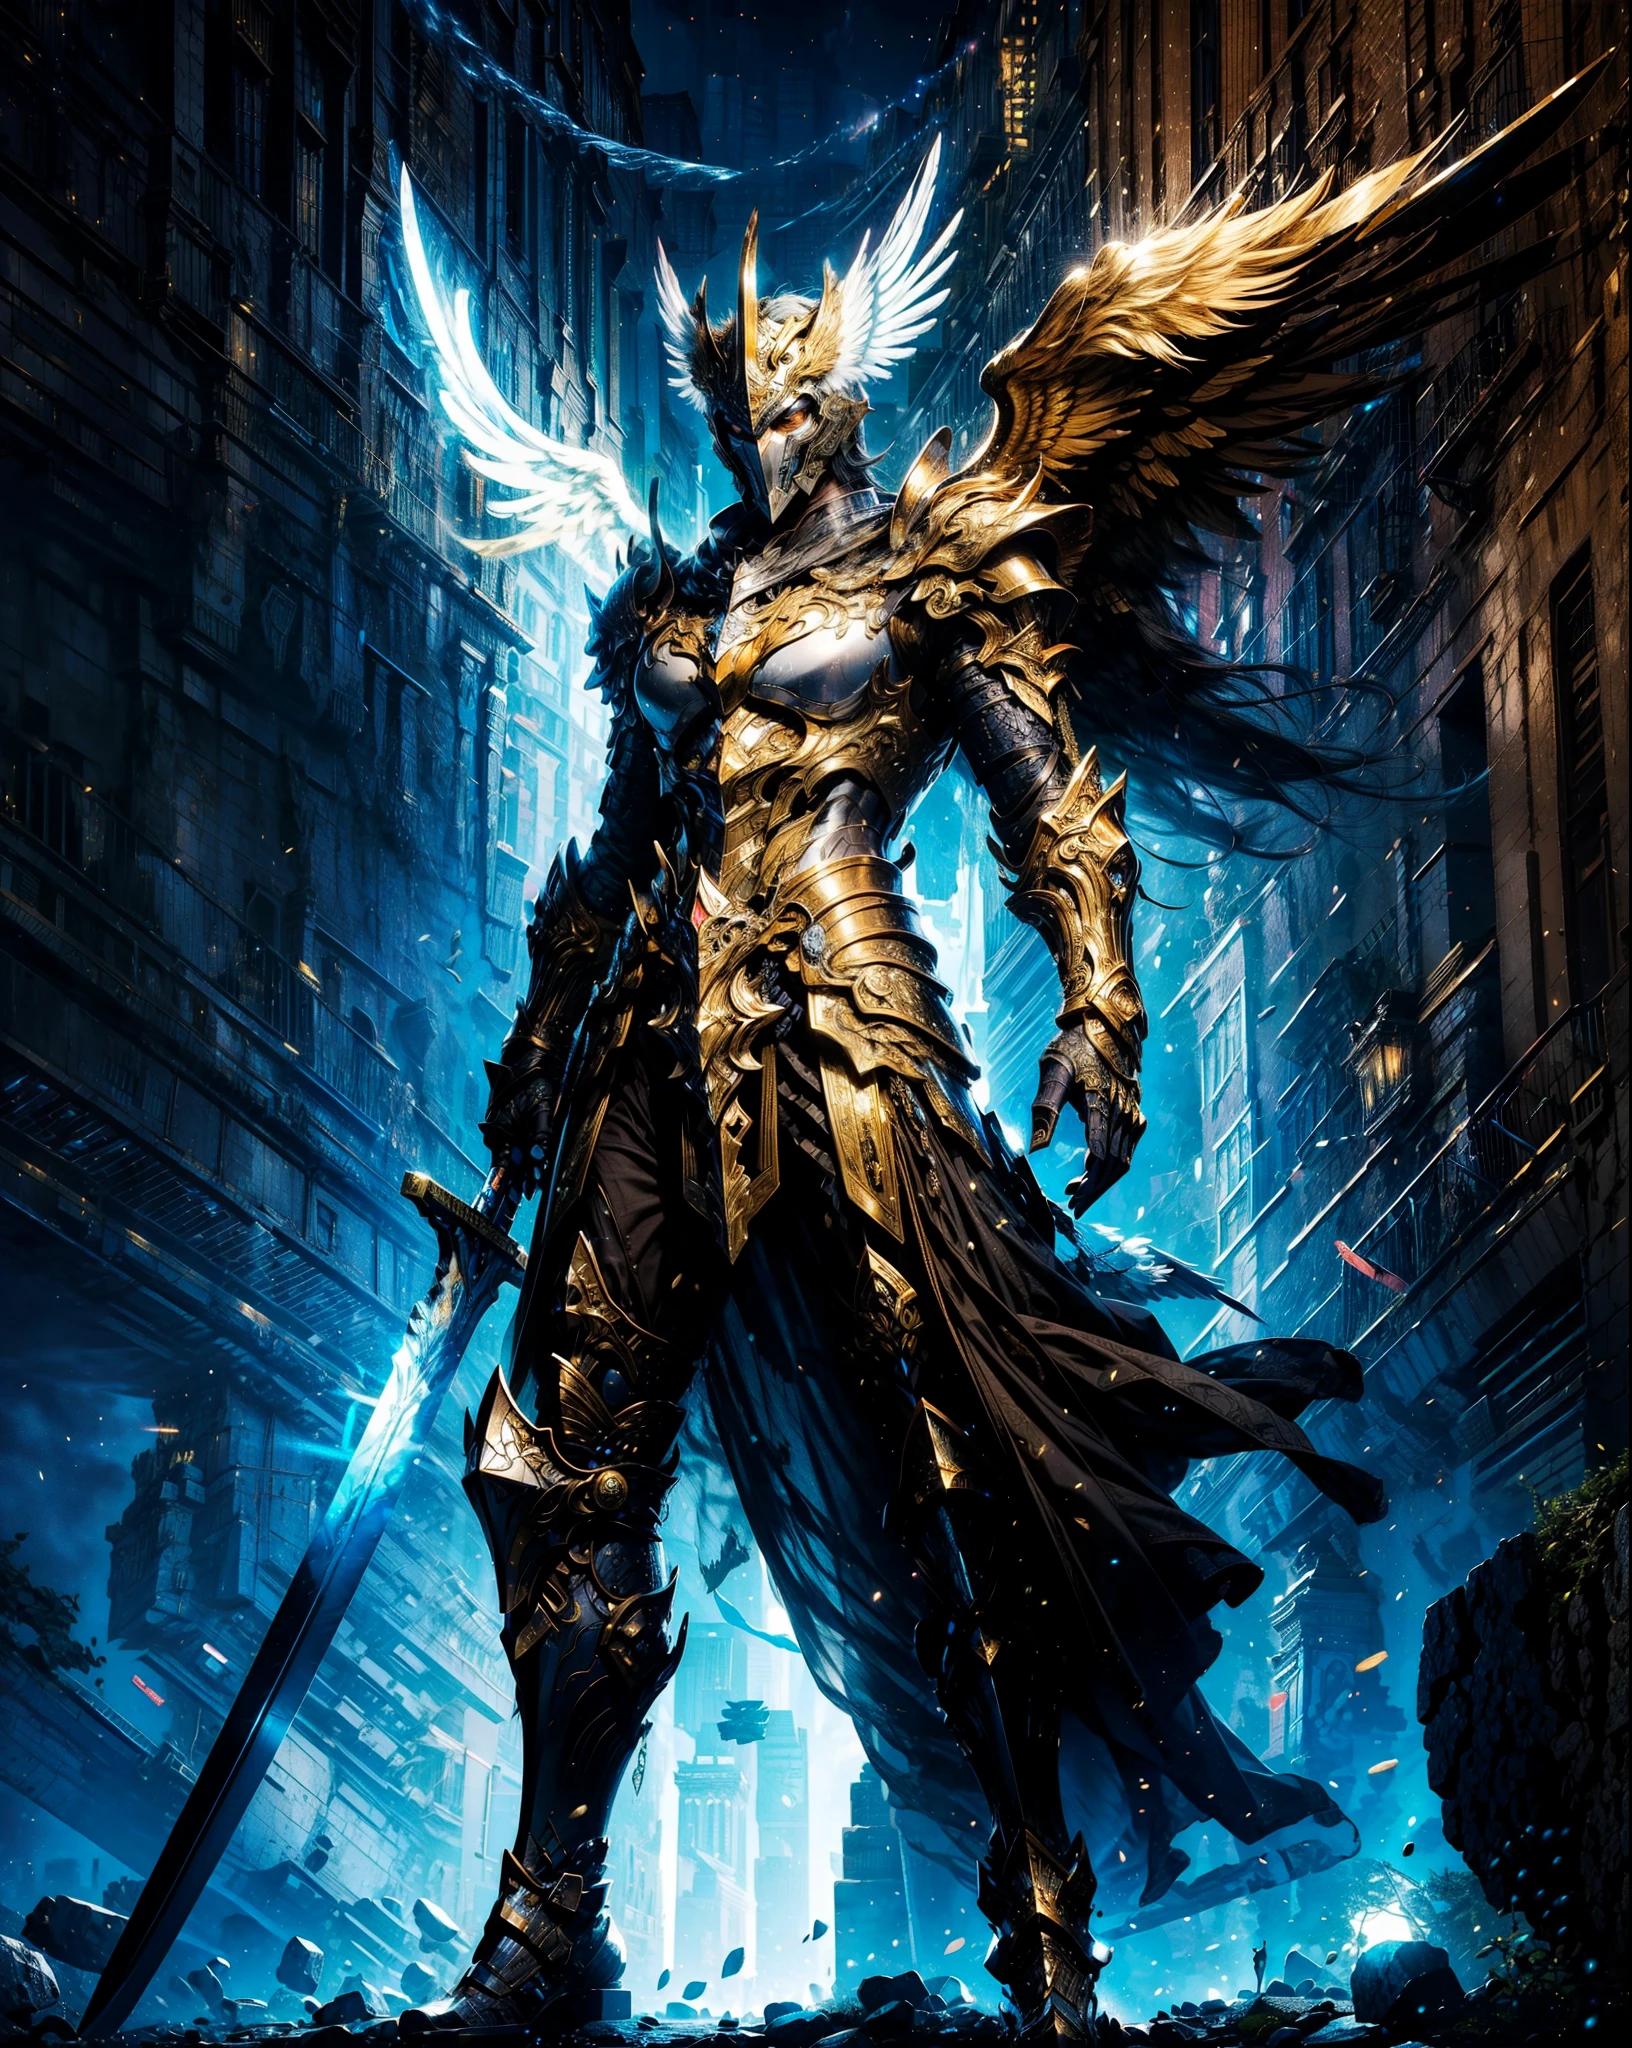 (best quality,ultra-detailed),celestial angel of battle, flying, 4 large wings, golden and white colors,divine armor,elaborate and detailed filigree metal design, large divine sword in hand, sacred aura,imposing presence,full body shot, fitness body, epic battle-ready stance,stunning background of a majestic castle in sky,large sword in hand,exquisite craftsmanship and attention to detail,vivid colors to emphasize the regal nature of the knight,strong and confident expression,flawless lighting to highlight every intricate detail,perfectly balanced composition reminiscent of classical art,commanding and awe-inspiring.